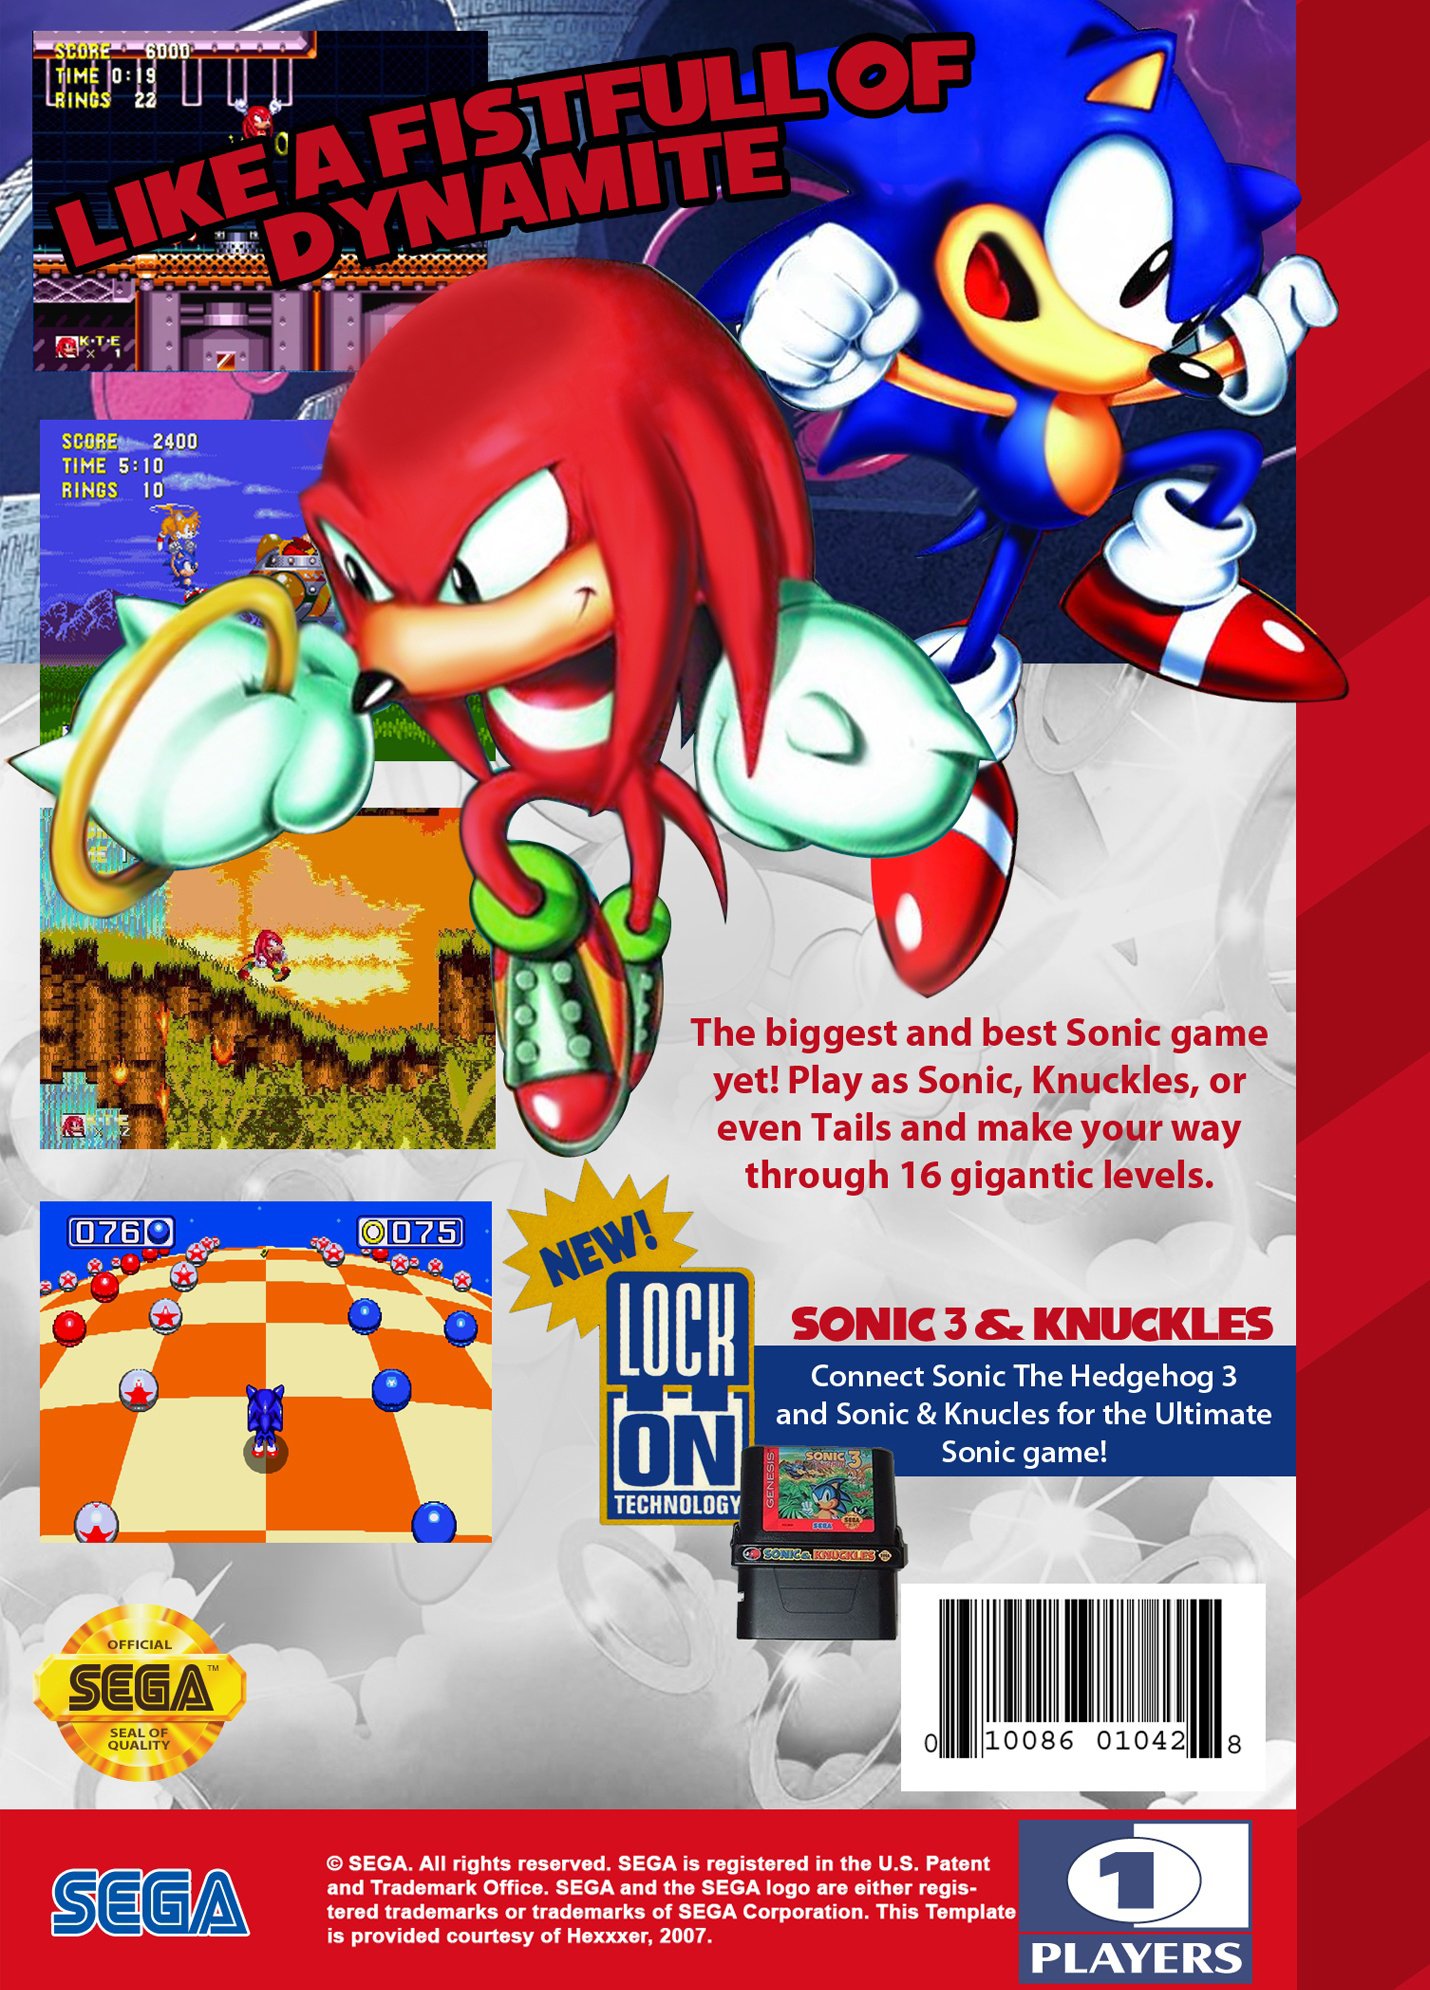 sonic-the-hedgehog-3-knuckles-video-game-box-art-id-48416-image